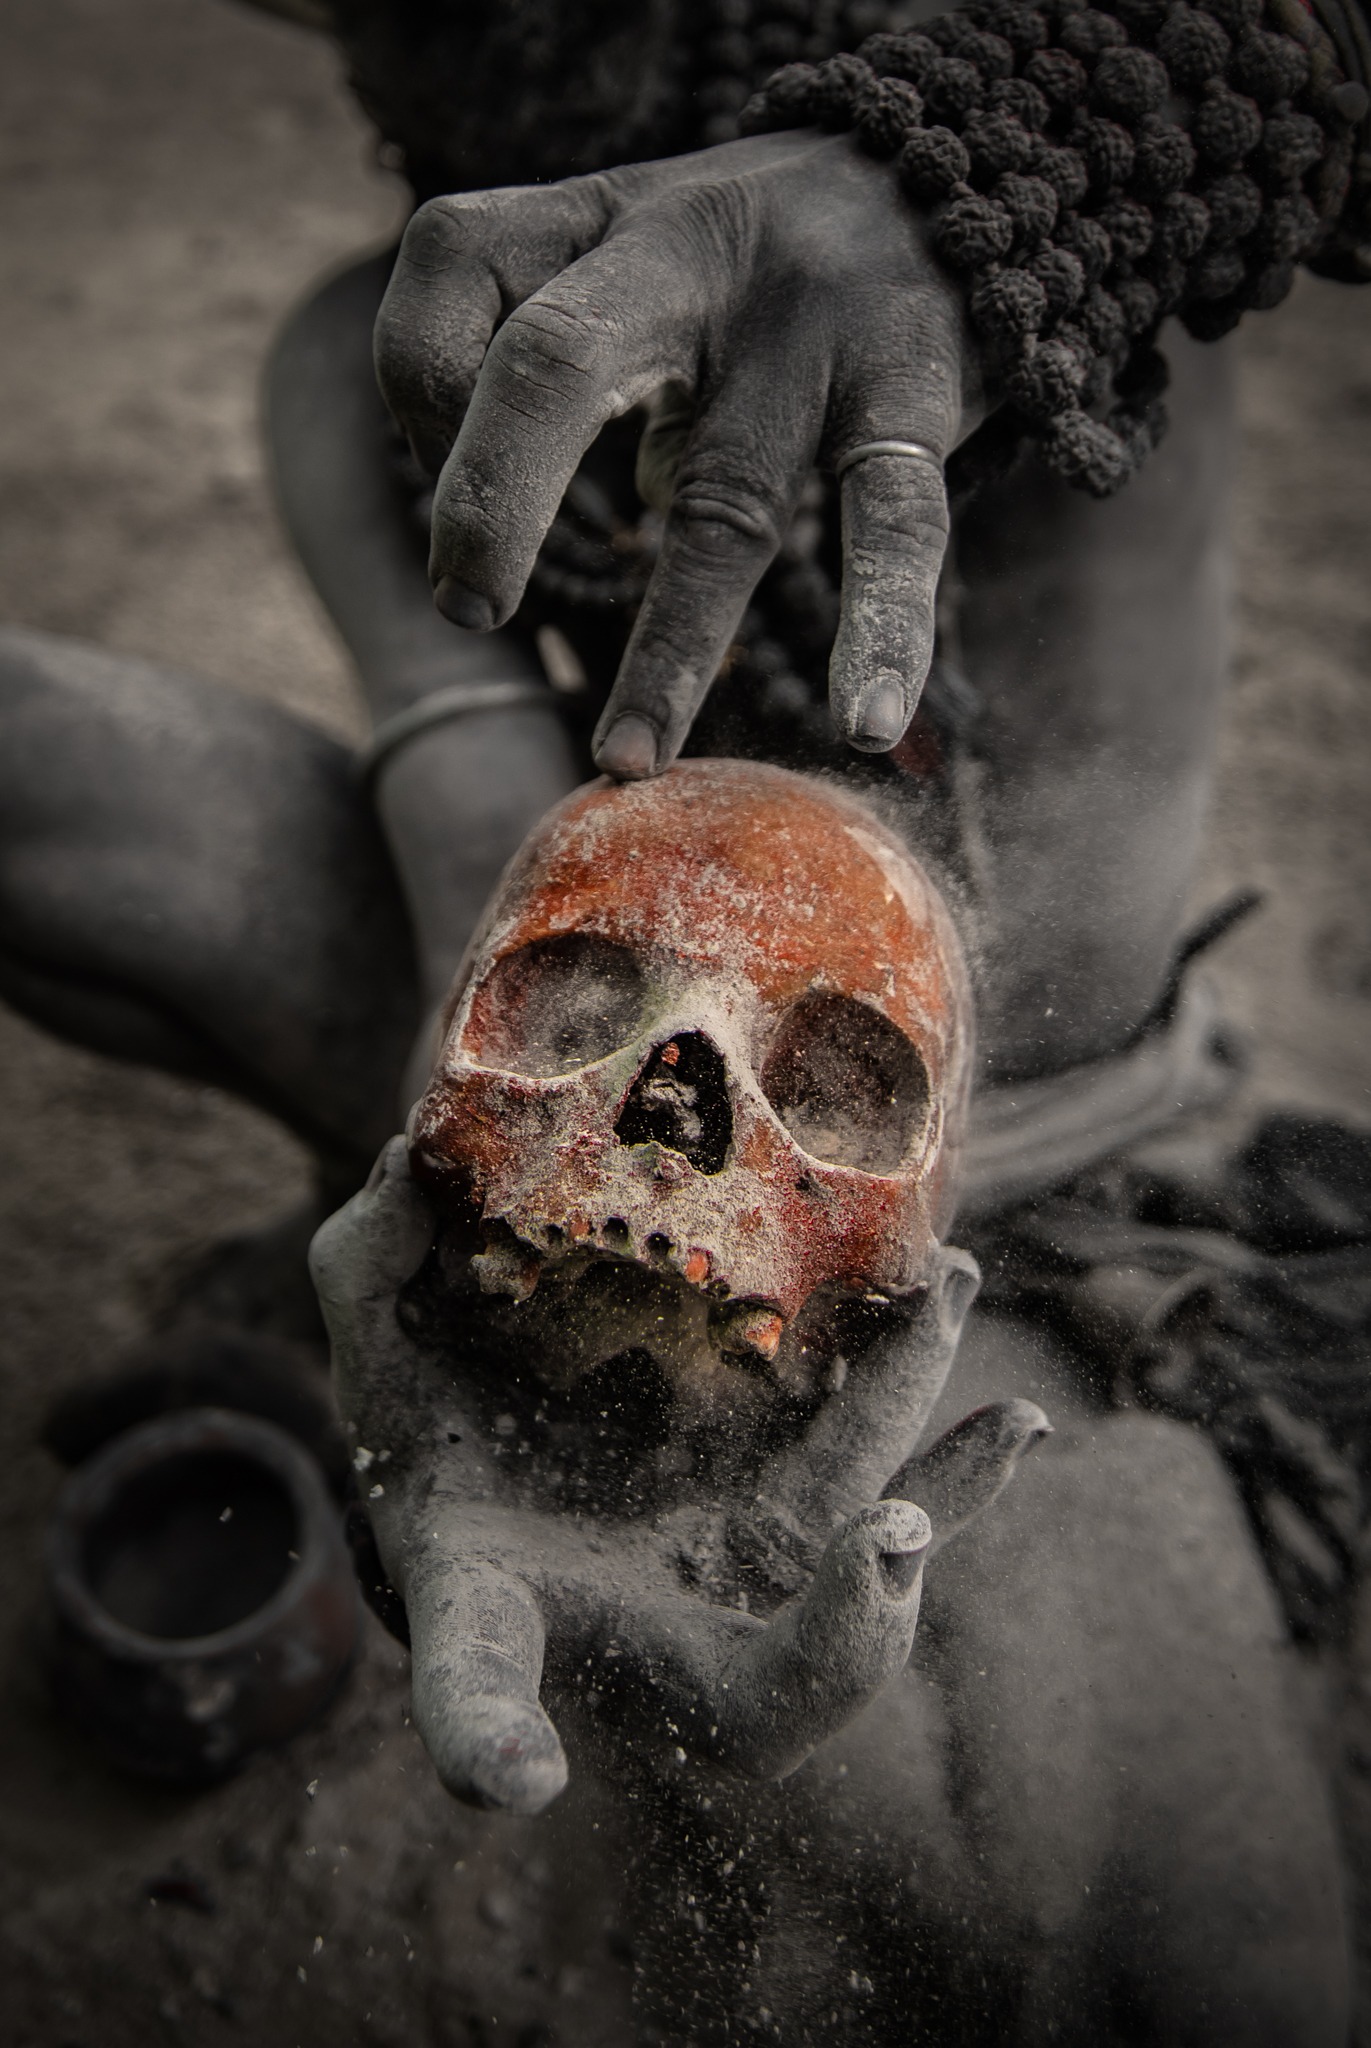 Aghori using ashes from crematory ghat